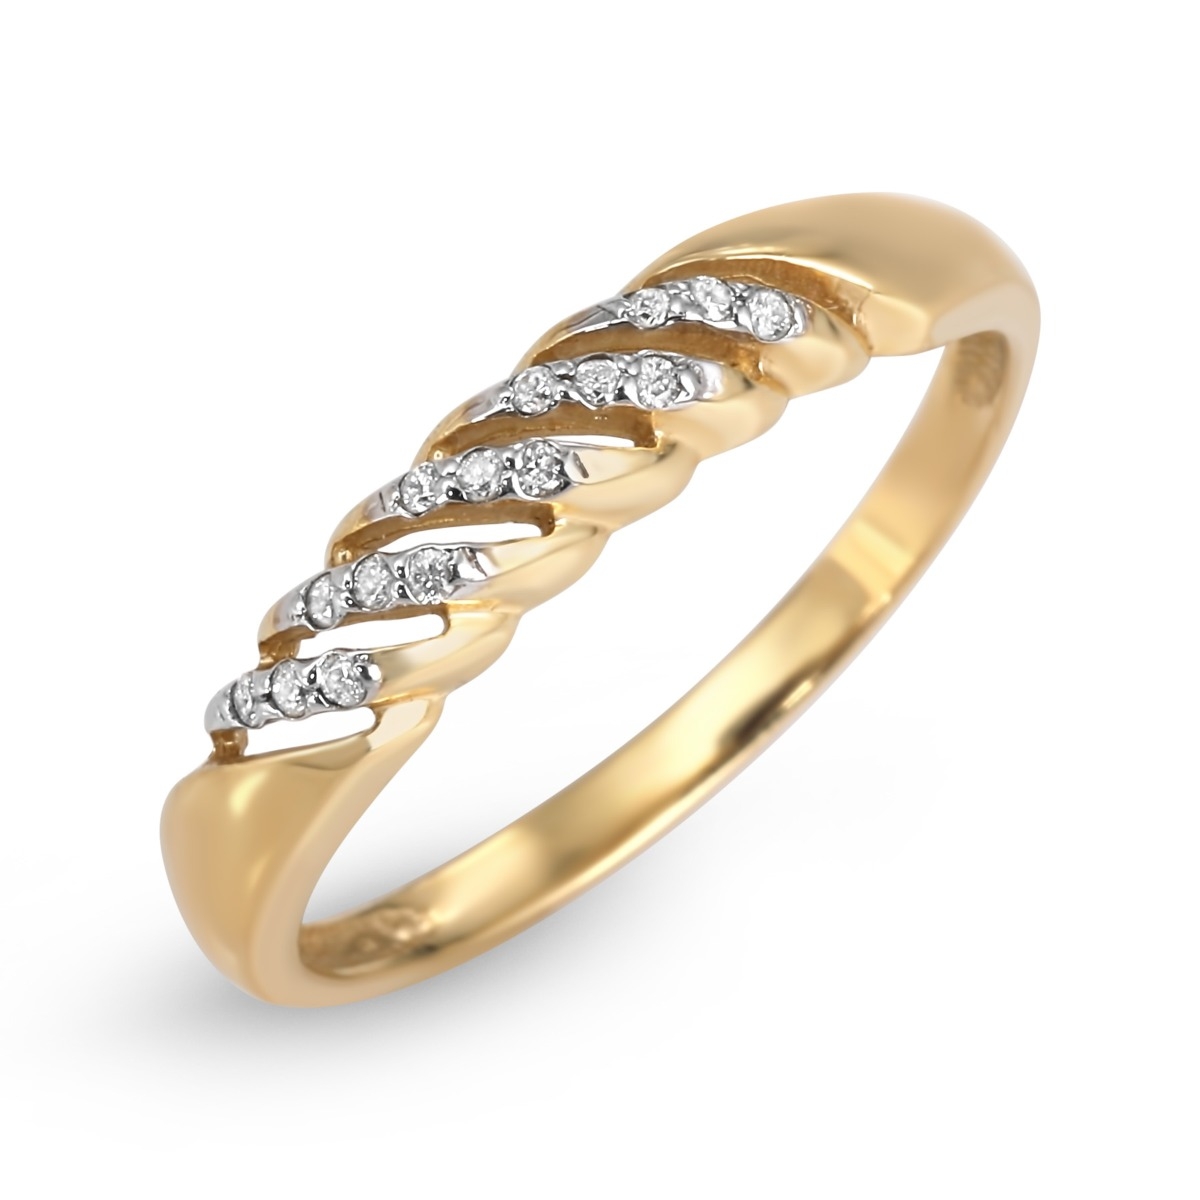 14K Gold Women’s Ring with Spiral Cutout Design and Diamond Accents - 1